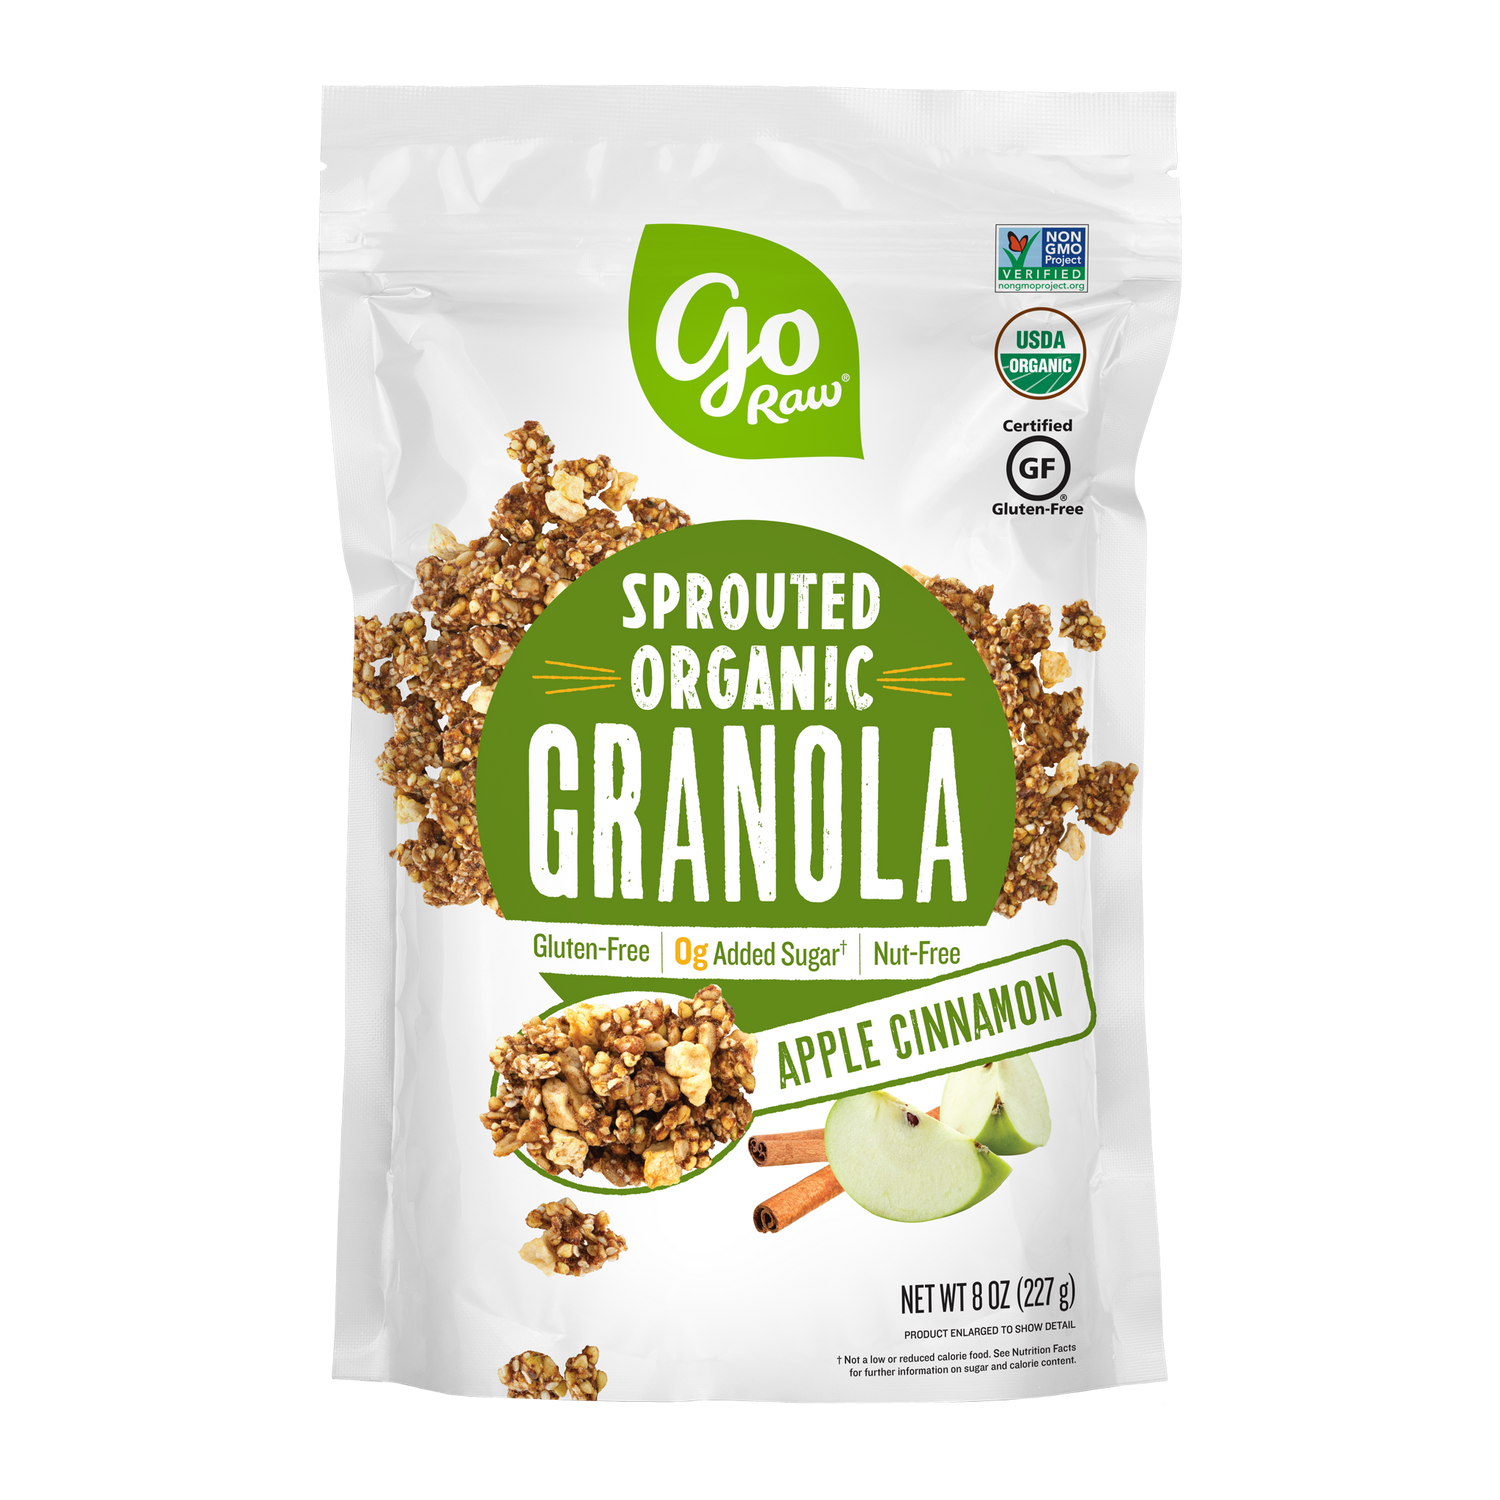 Apple Cinnamon Sprouted Granola - 6 bags, 8oz Each